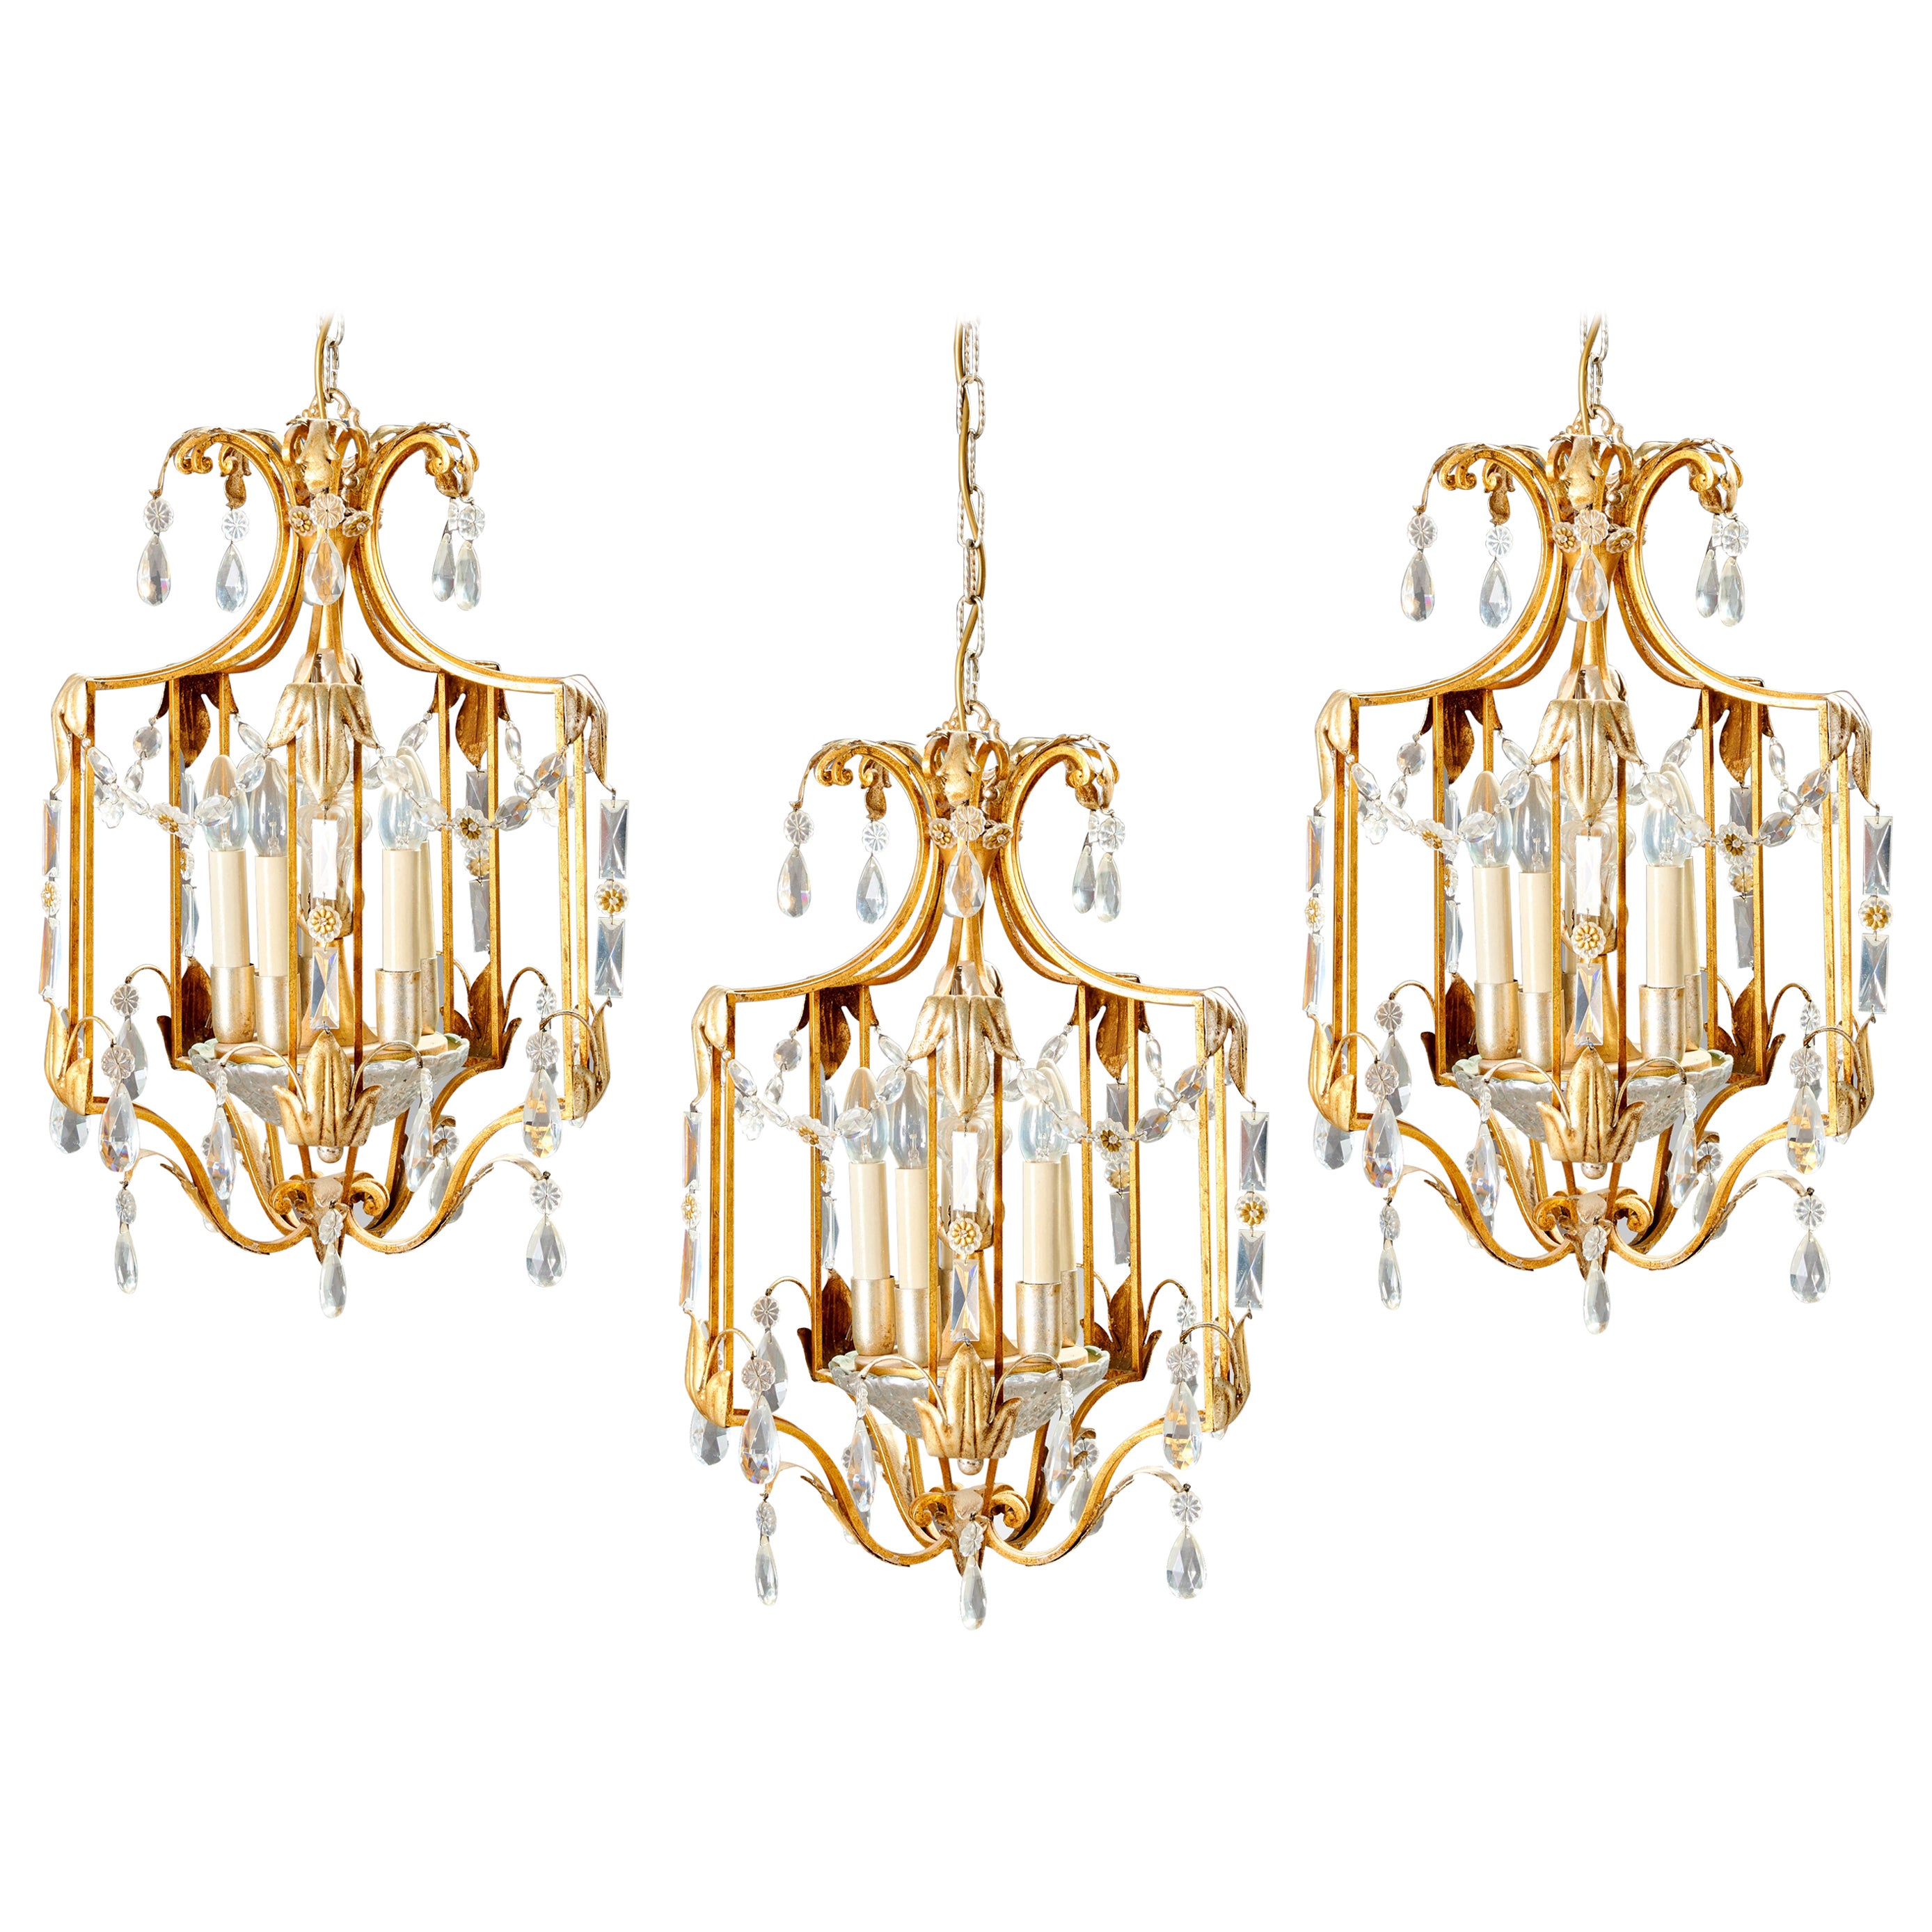 "Maison Baguès", Three Large and Elegant Lanterns in Gold and Silver Metal, 1950 For Sale